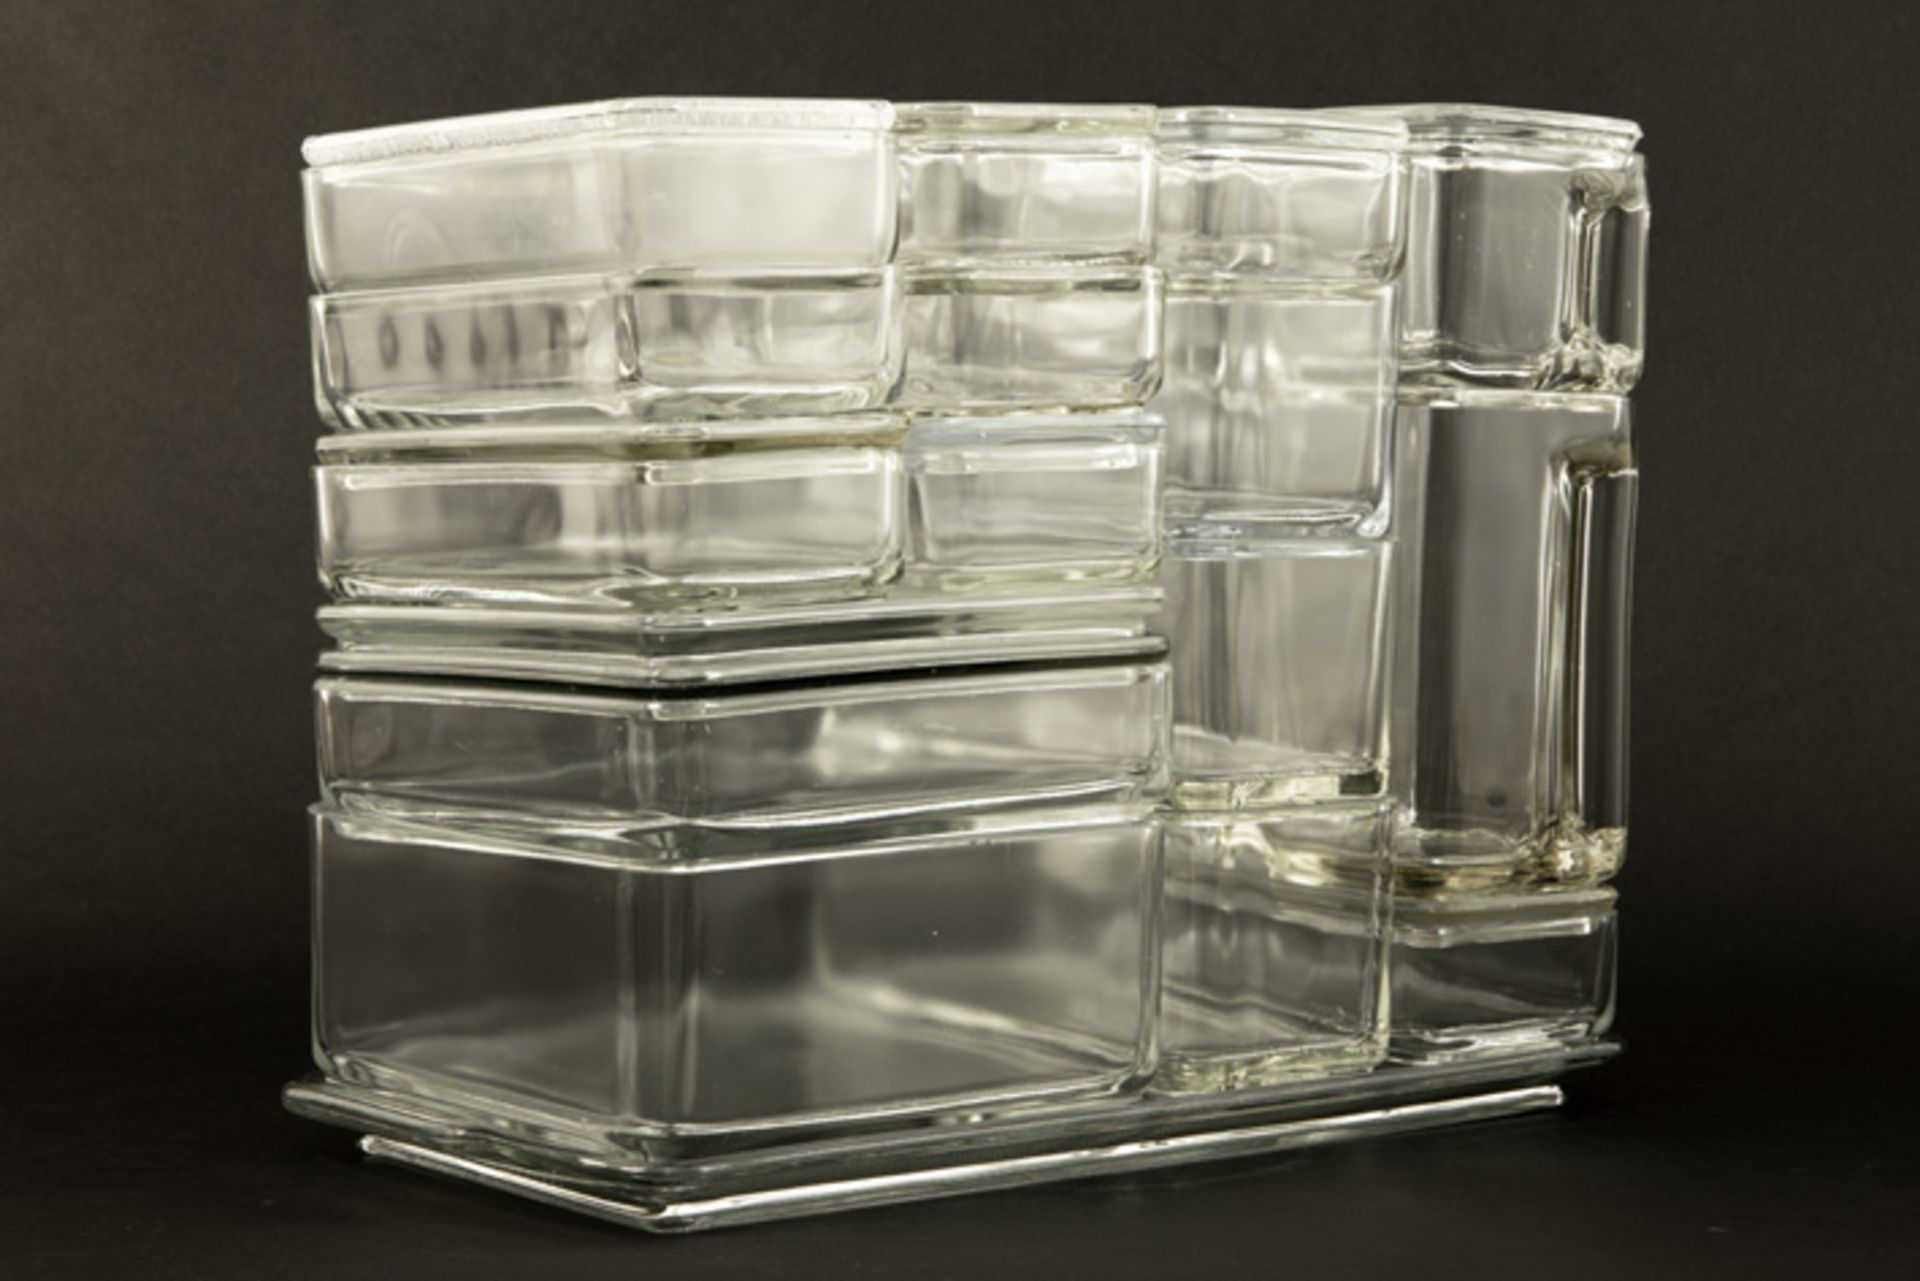 Wilhelm Wagenfeld "Kubus" stacking storage container set (21 pcs) with lidded boxes and a decanter - Image 3 of 5